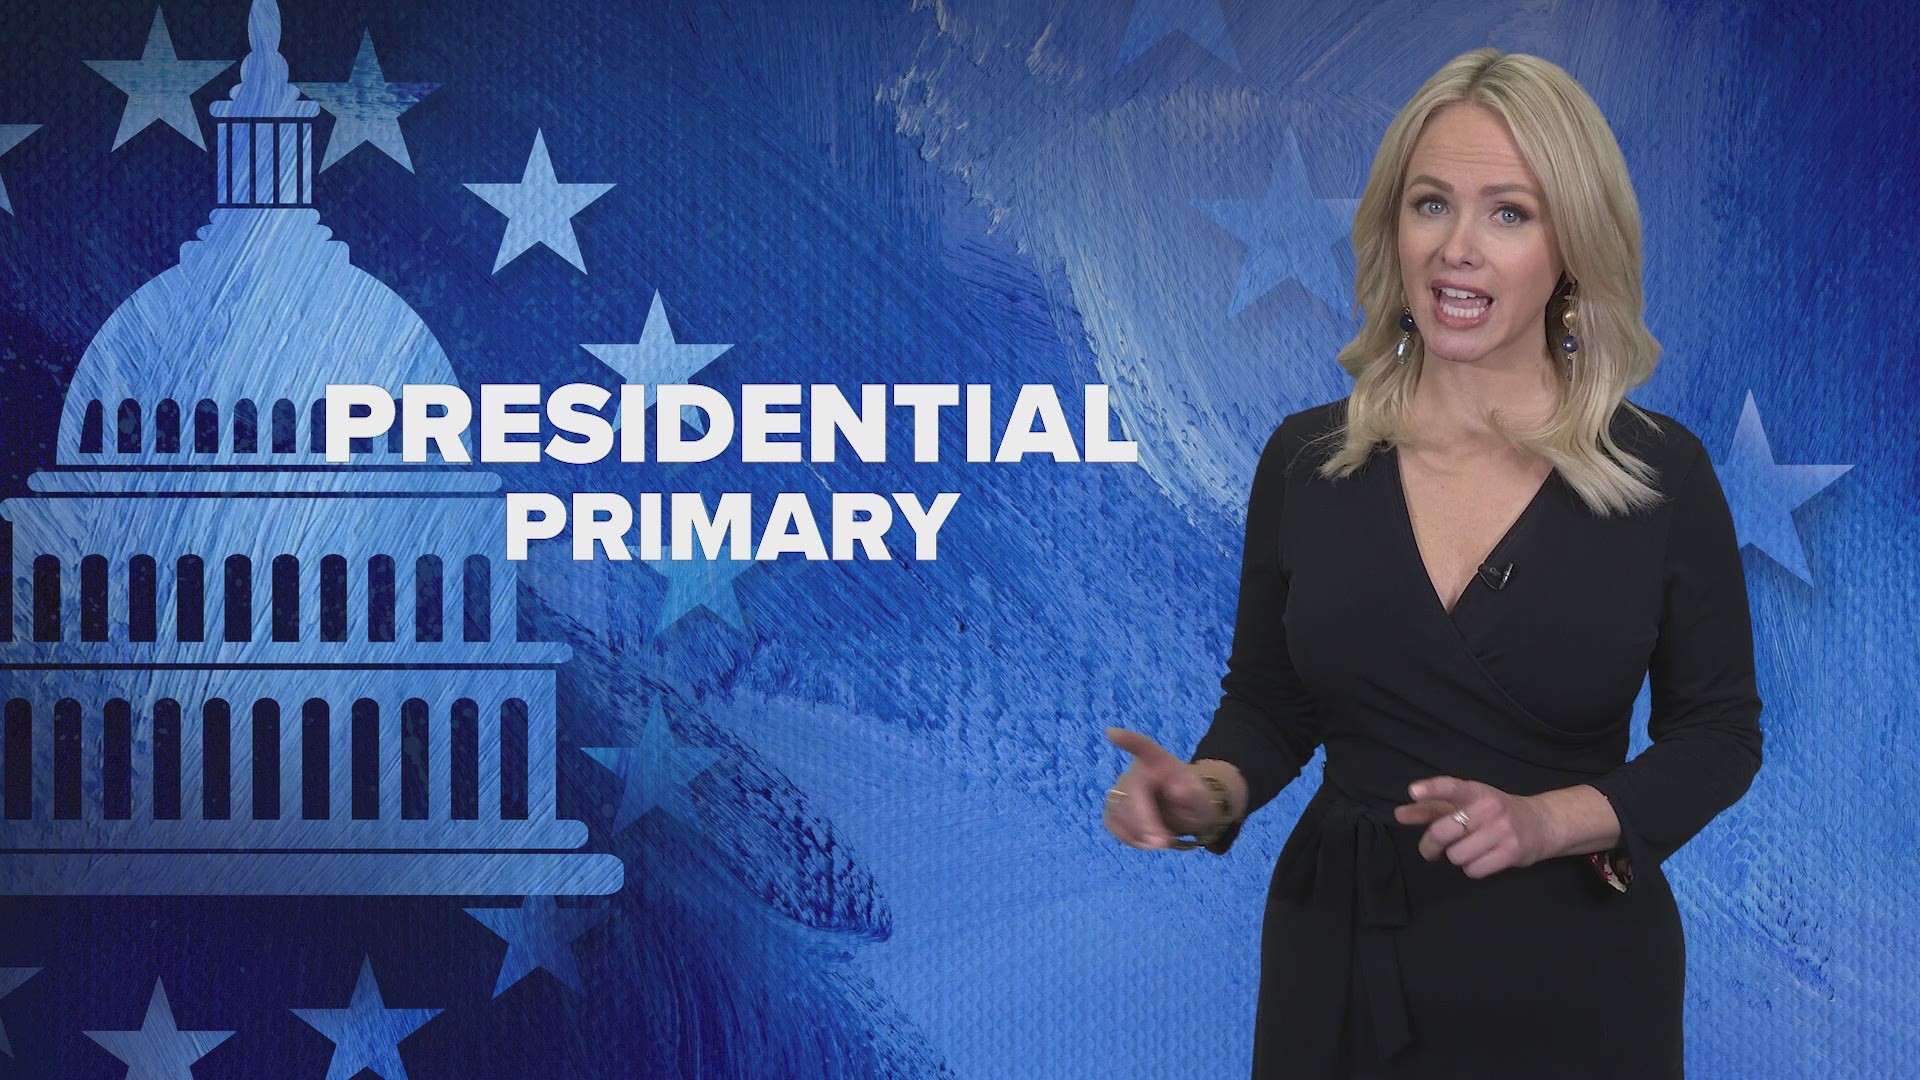 New York's presidential primary and a special election for New York's 27th Congressional District are scheduled for April 28, 2020.